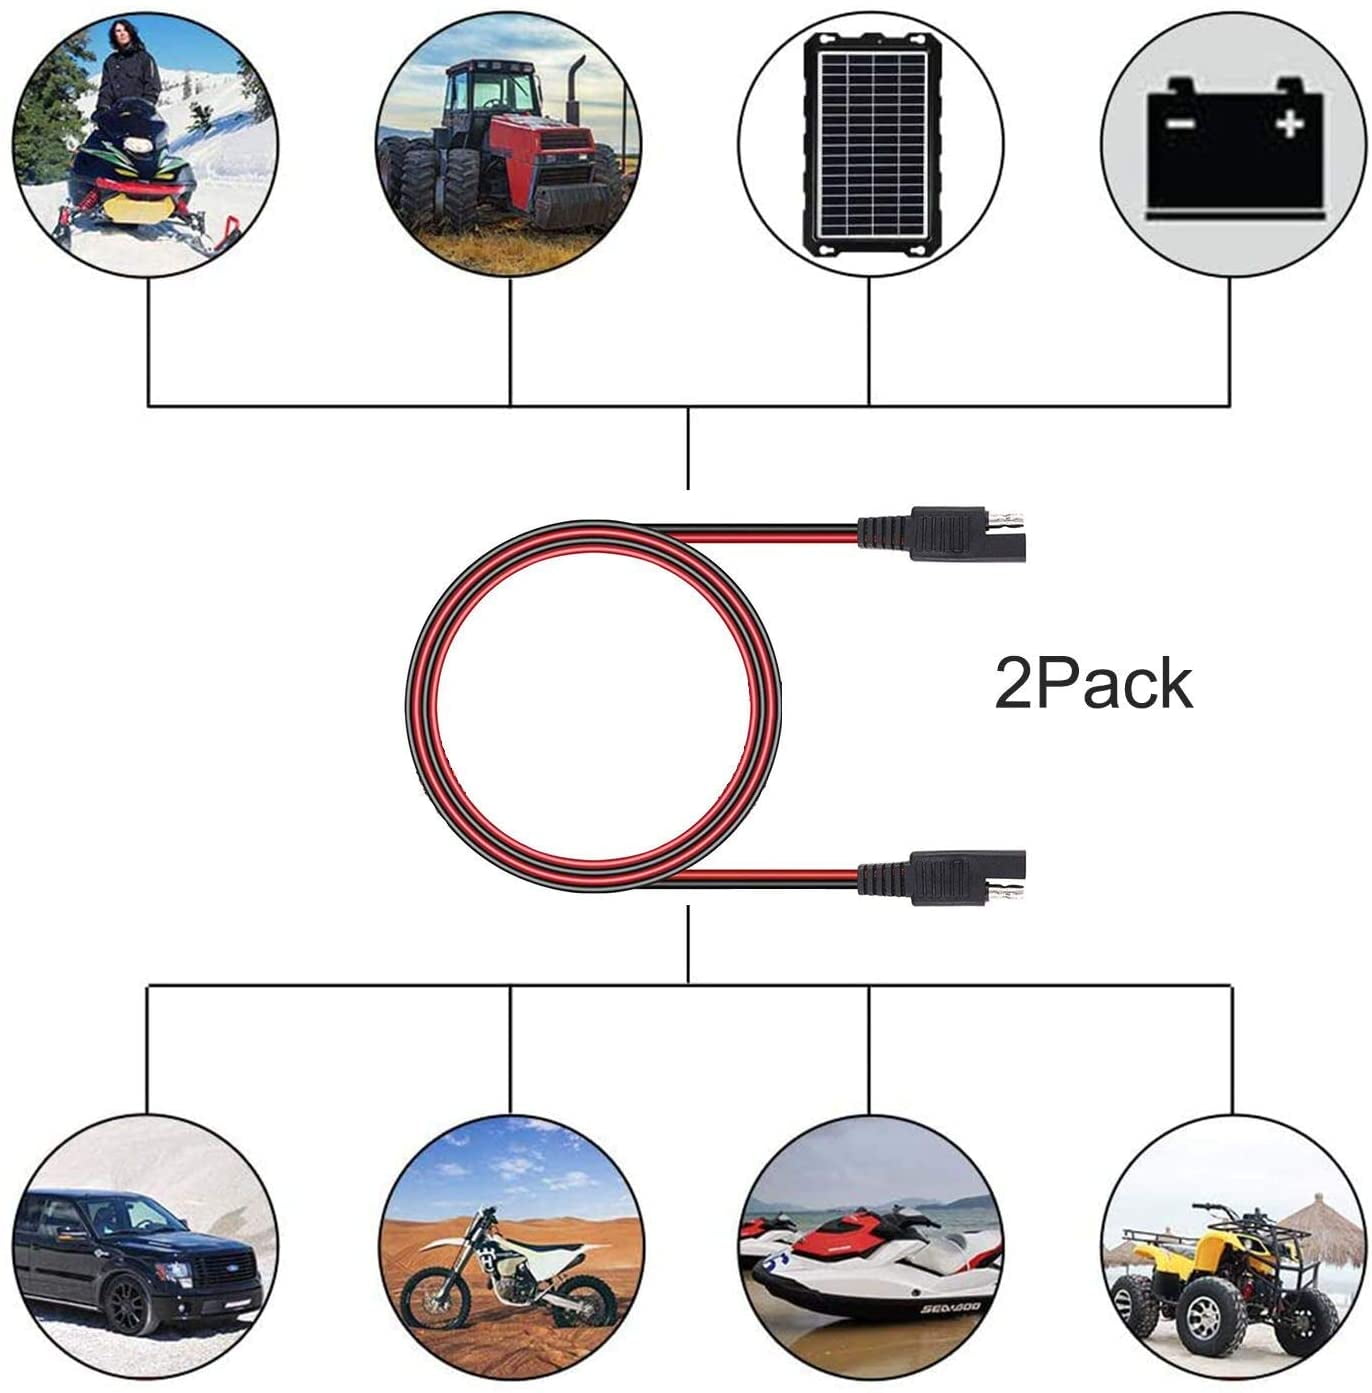 Meiyangjx SAE Connector Extension Cable 2Pack-30cm/1ft Solar Panel SAE Plug SAE Quick Connector Disconnect Plug SAE Automotive Extension Cable 